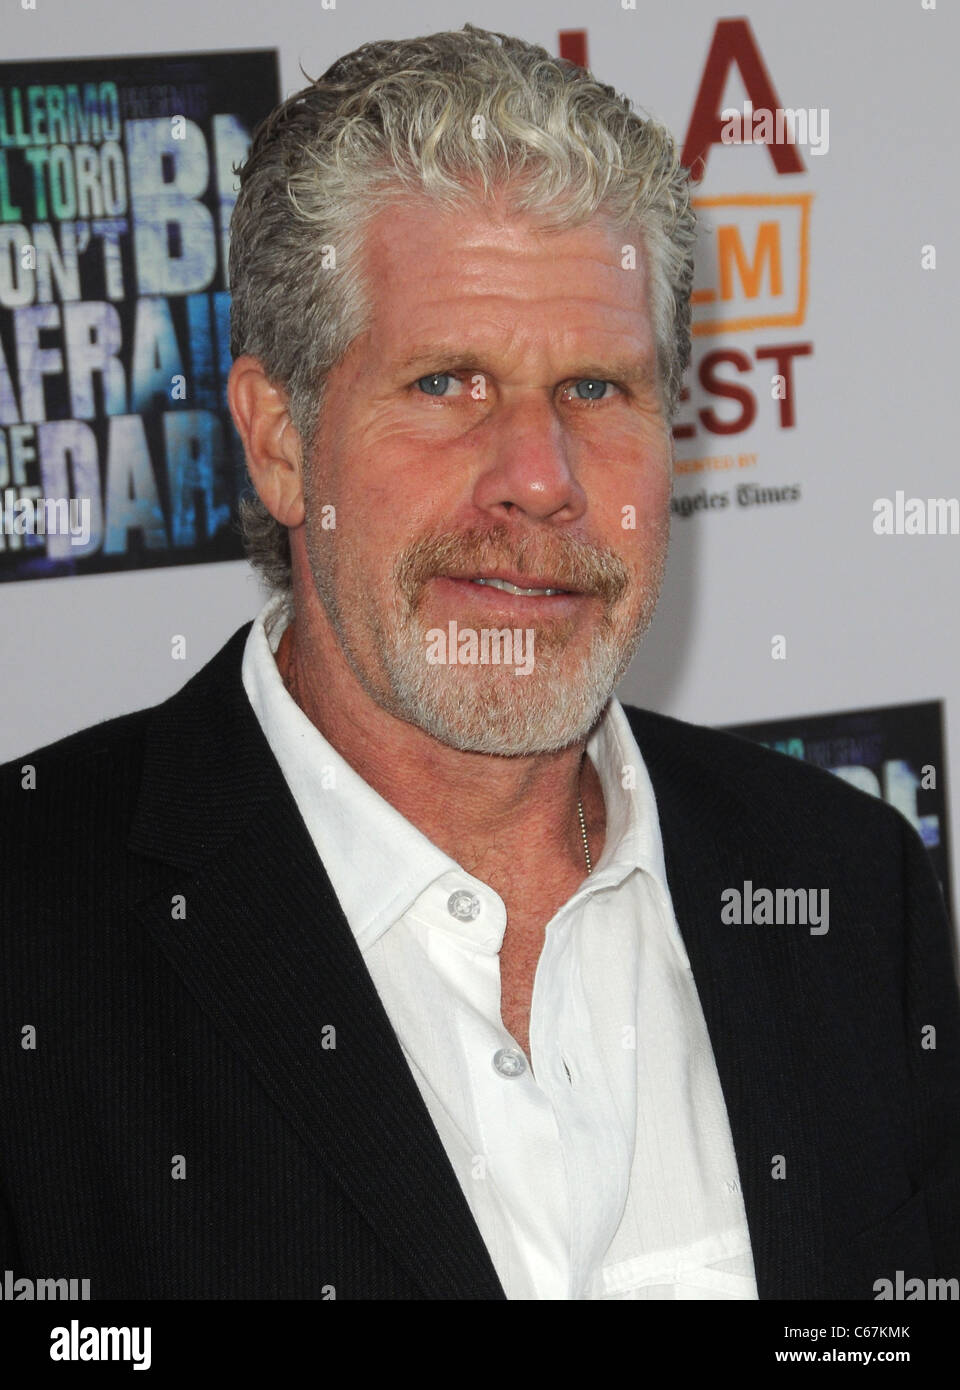 Ron Perlman at arrivals for Don't Be Afraid of the Dark Premiere, Regal Cinemas L.A. Live, Los Angeles, CA June 26, 2011. Photo Stock Photo